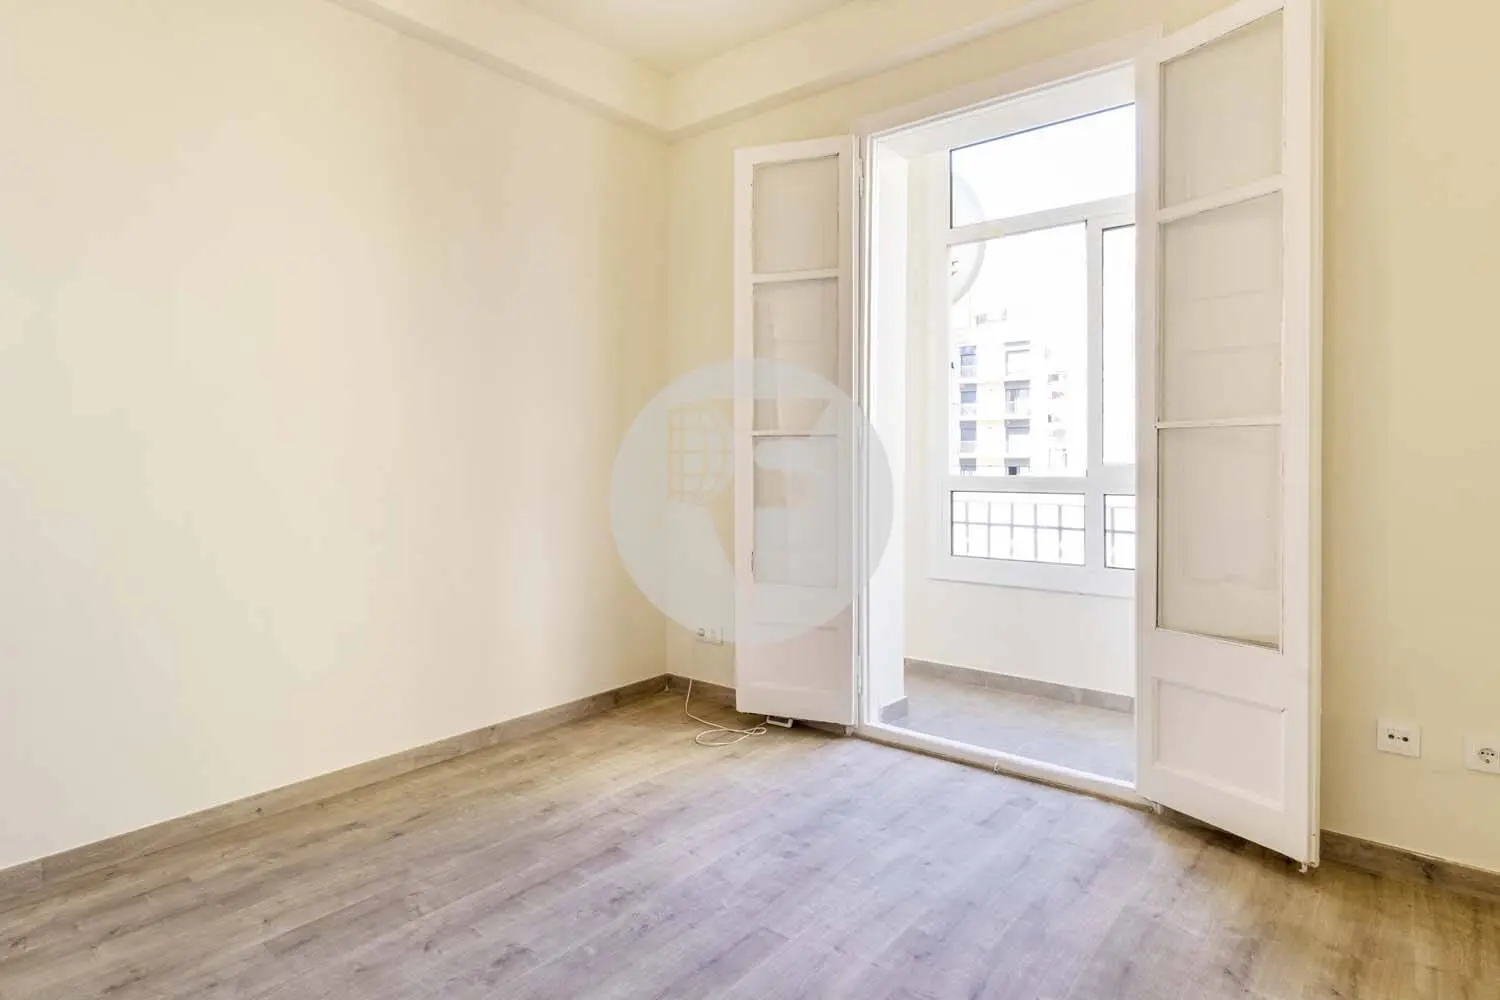 Renovated to brand new apartment in Rocafort street 2